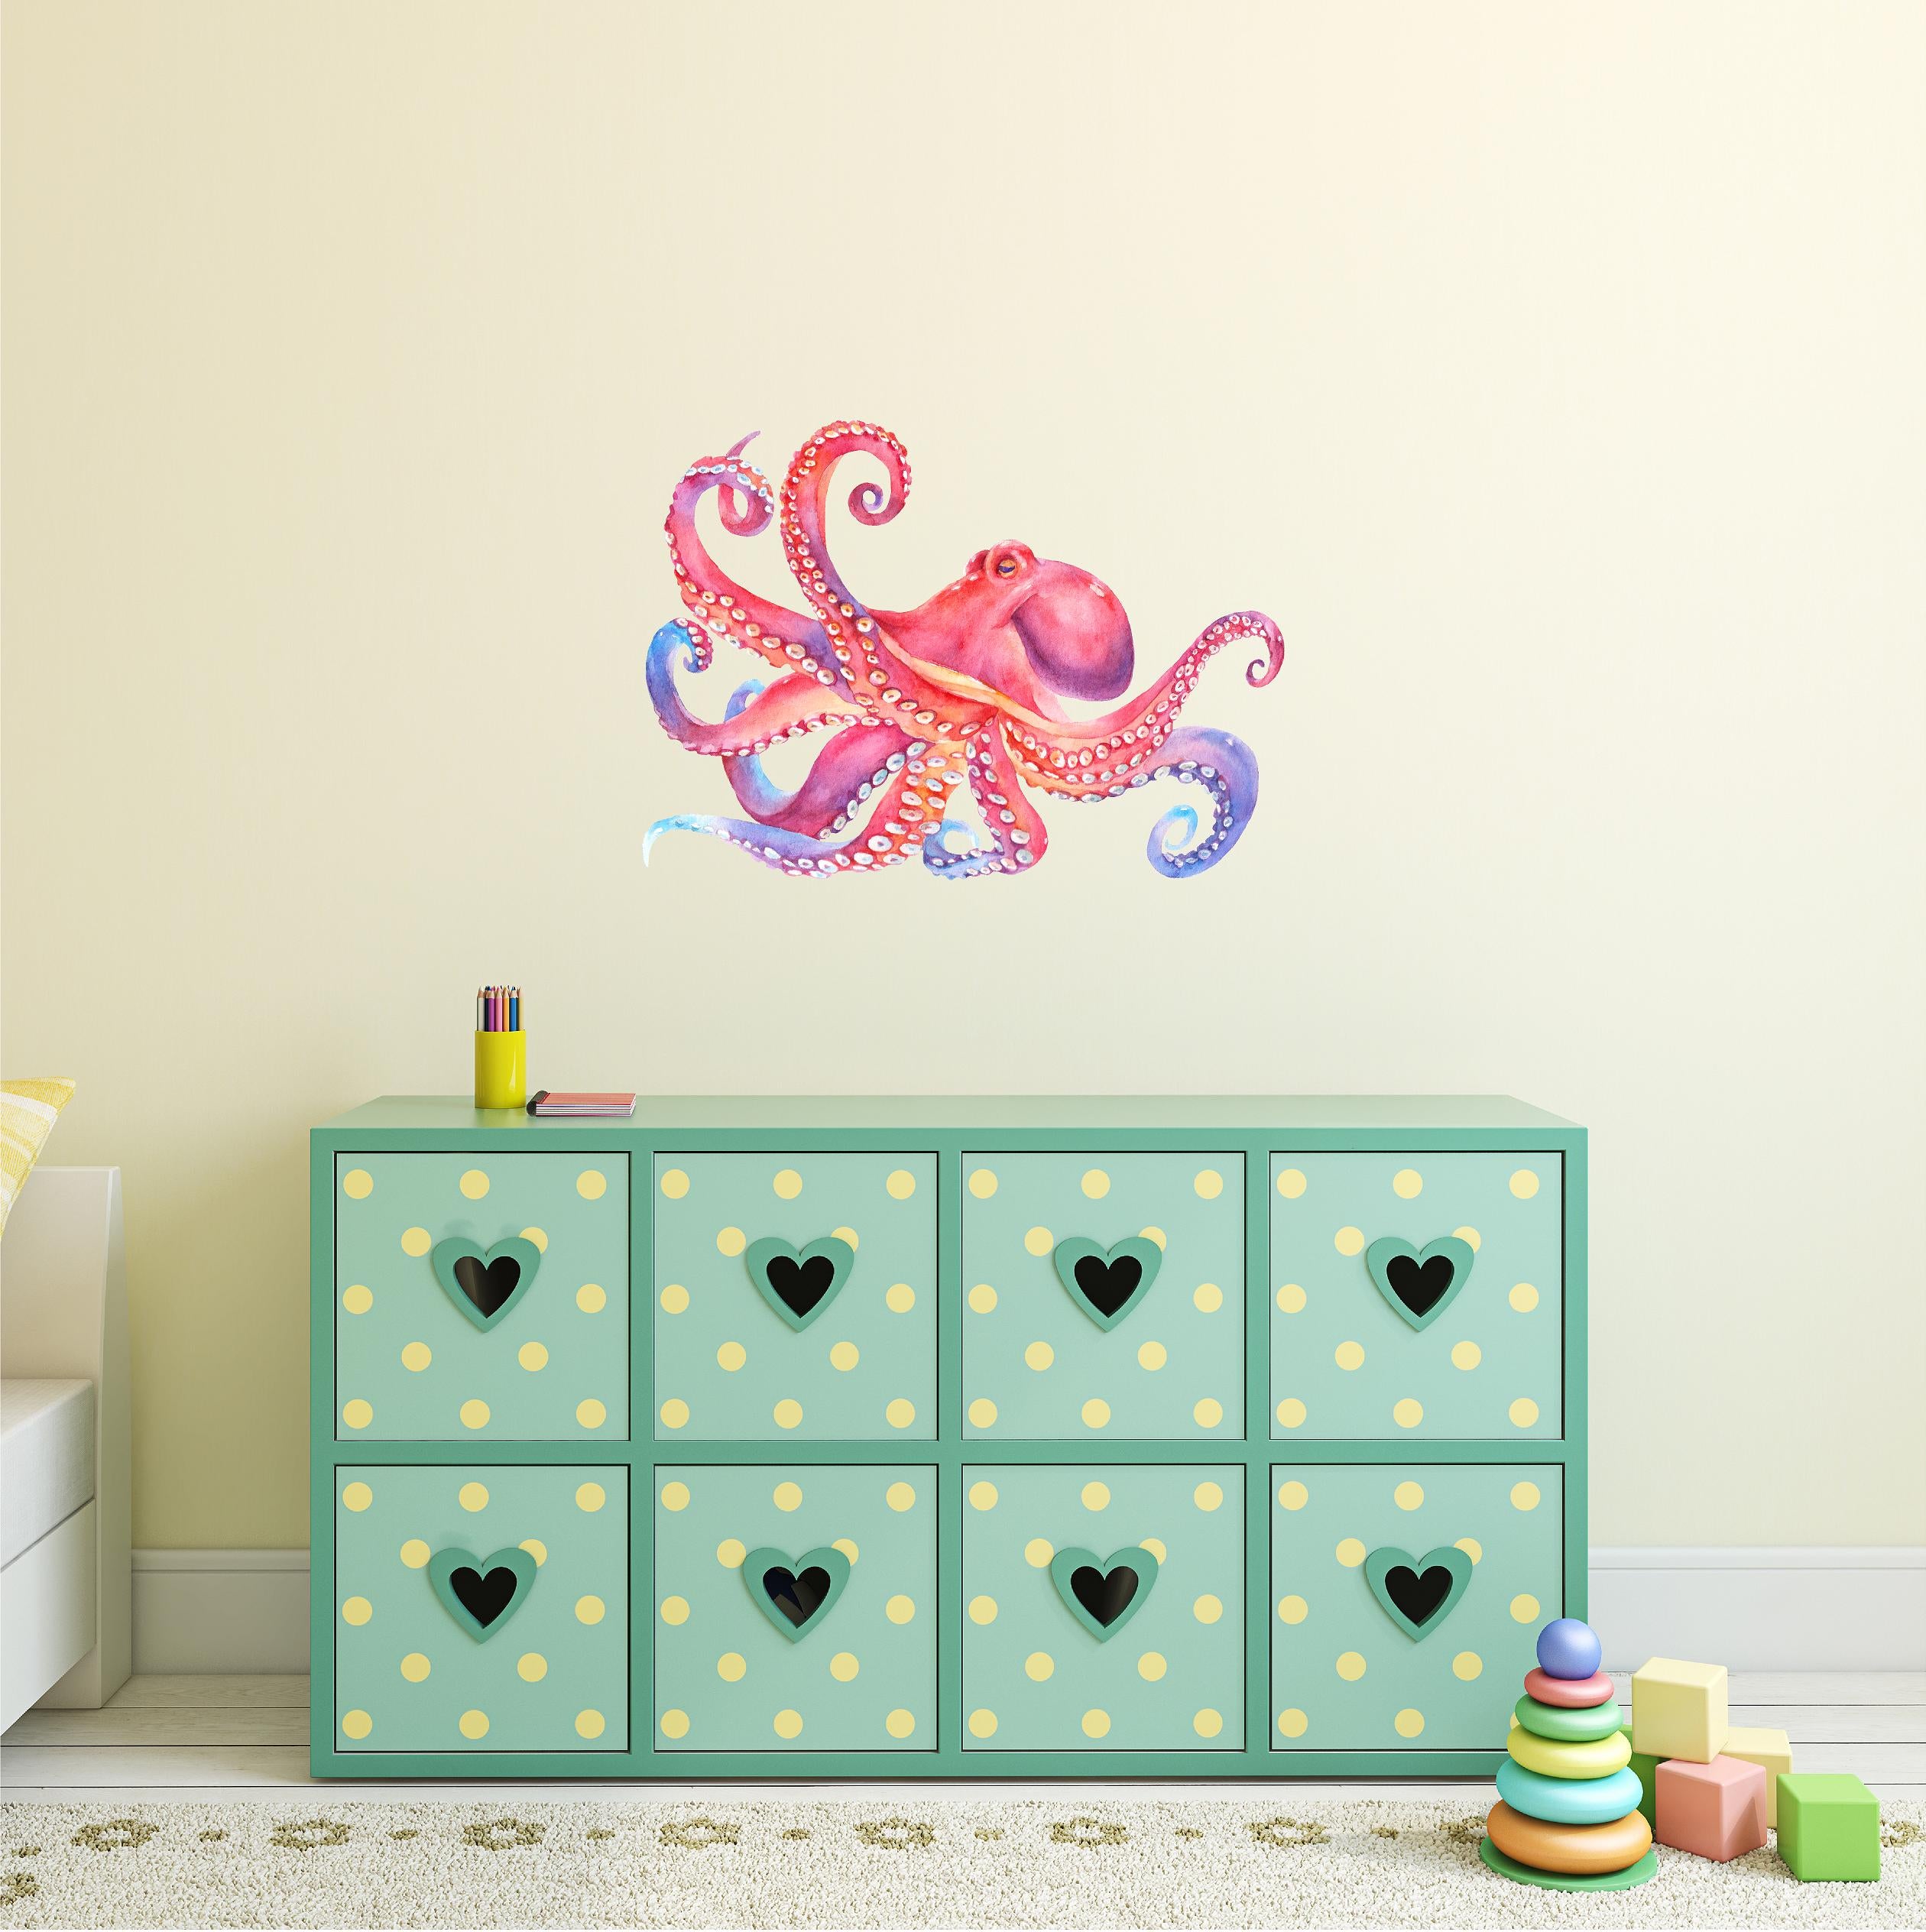 Watercolor Octopus #5 Wall Decal Red Blue Octopus Wall Sticker Removable Fabric Vinyl | DecalBaby